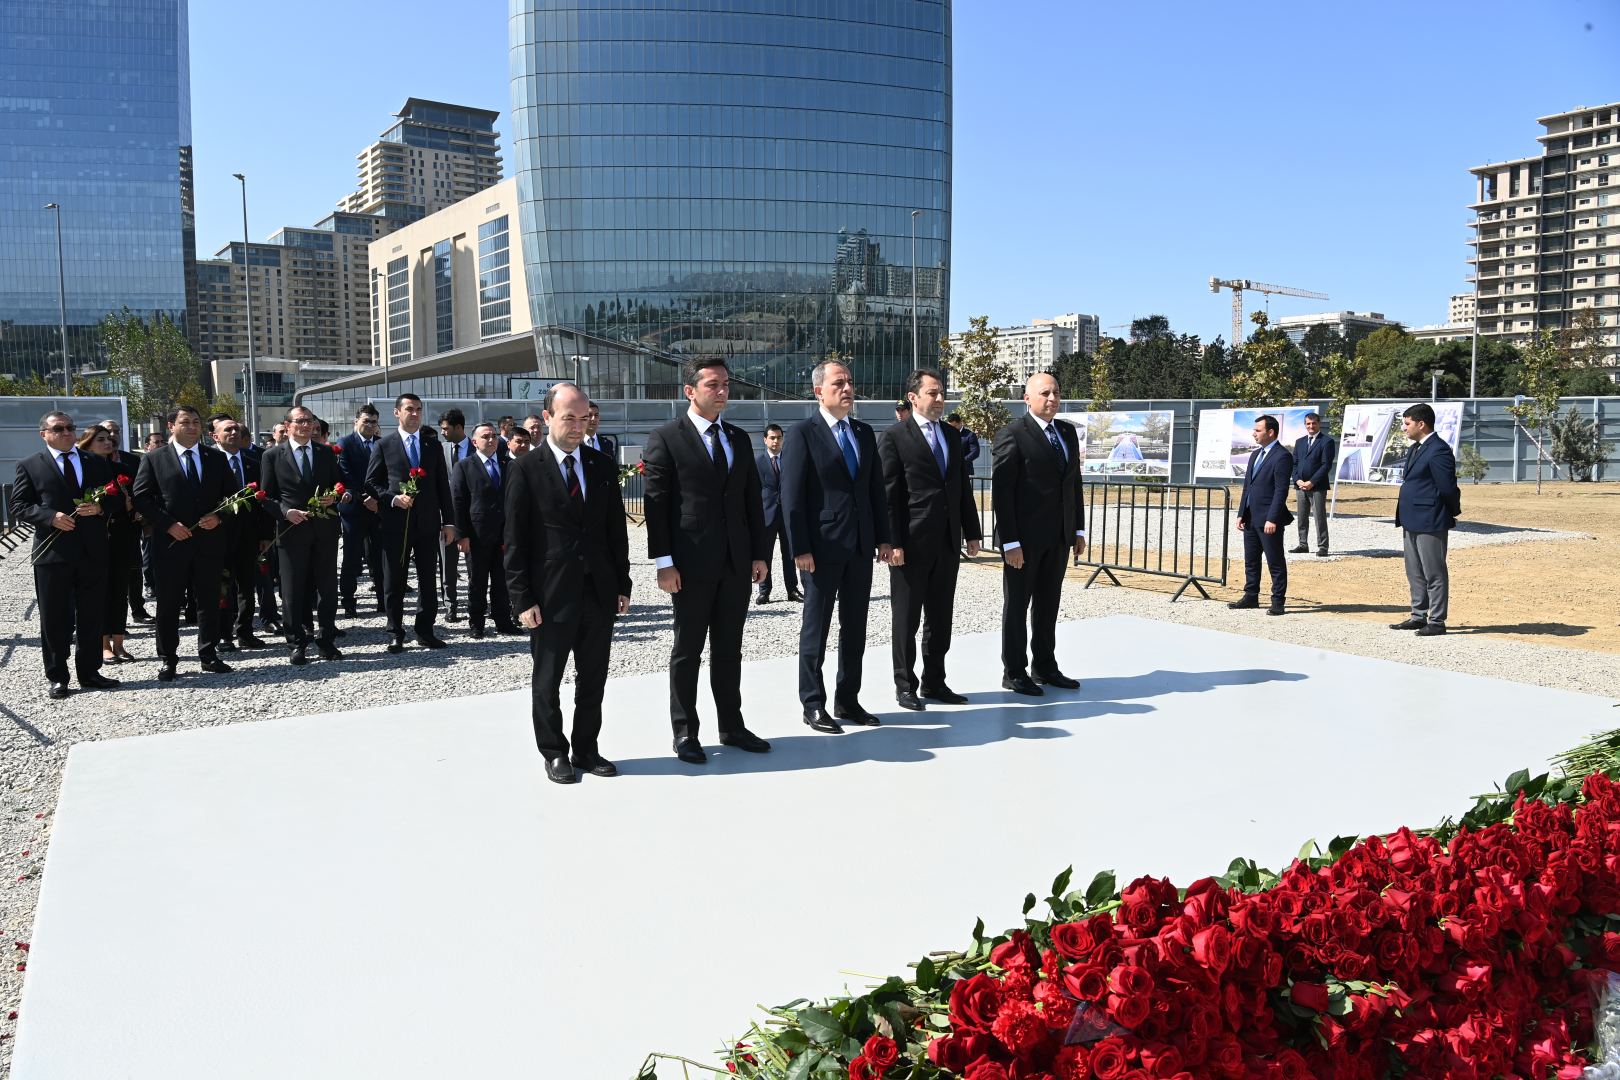 Azerbaijan's vision of future based on peaceful approach - FM (PHOTO)